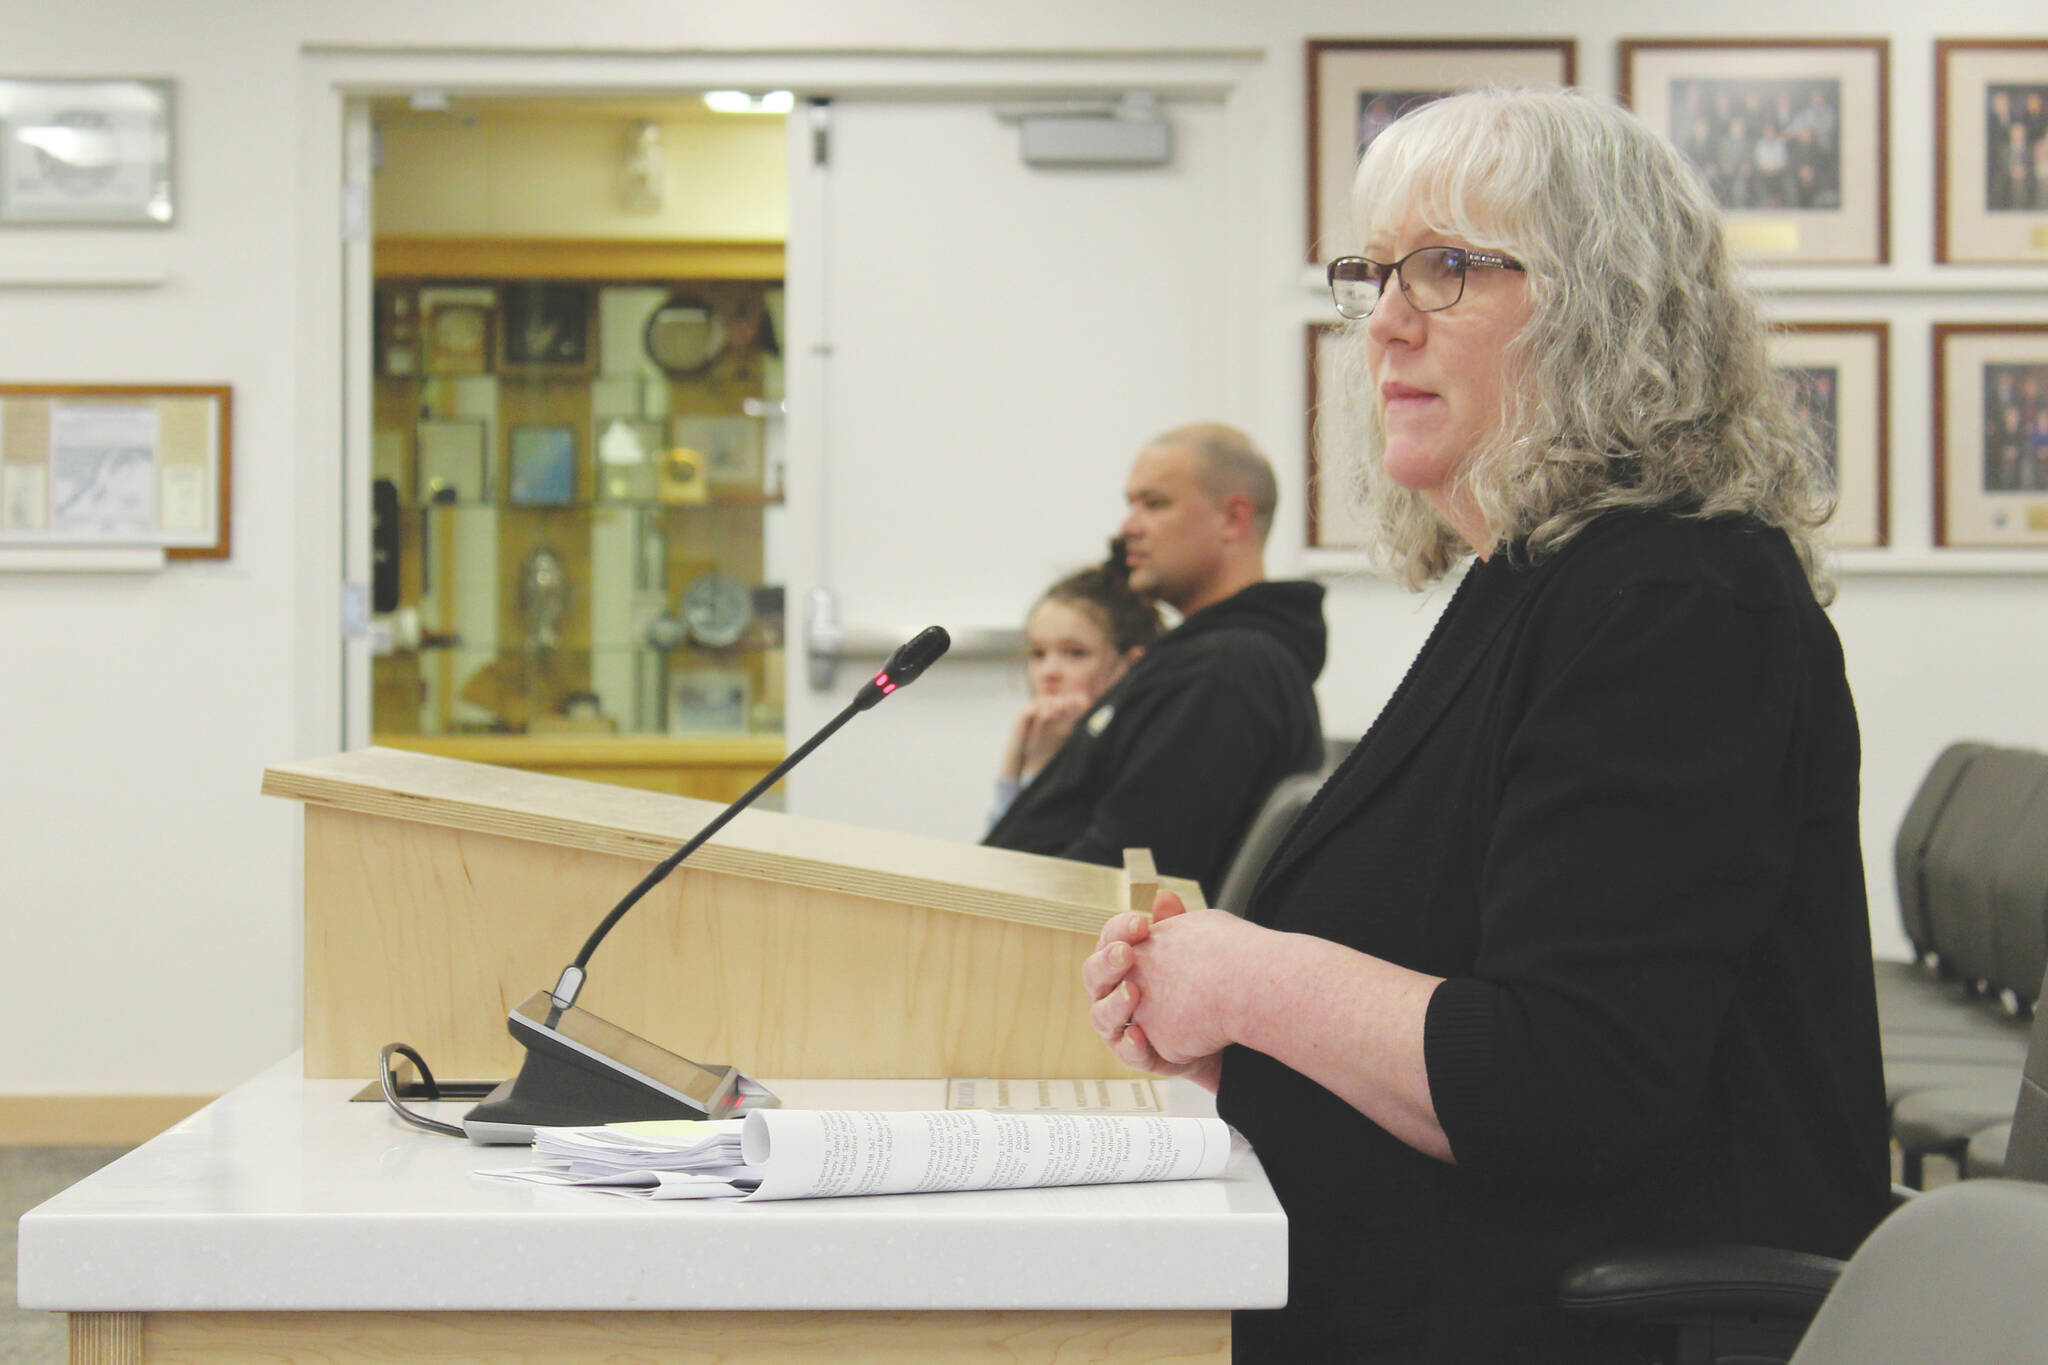 Kenai Peninsula Borough School District Board Member Debbie Cary speaks during a meeting of the Kenai Peninsula Borough Assembly on Tuesday, April 5, 2022 in Soldotna, Alaska. Cary also served on the borough’s reapportionment board. (Ashlyn O’Hara/Peninsula Clarion)